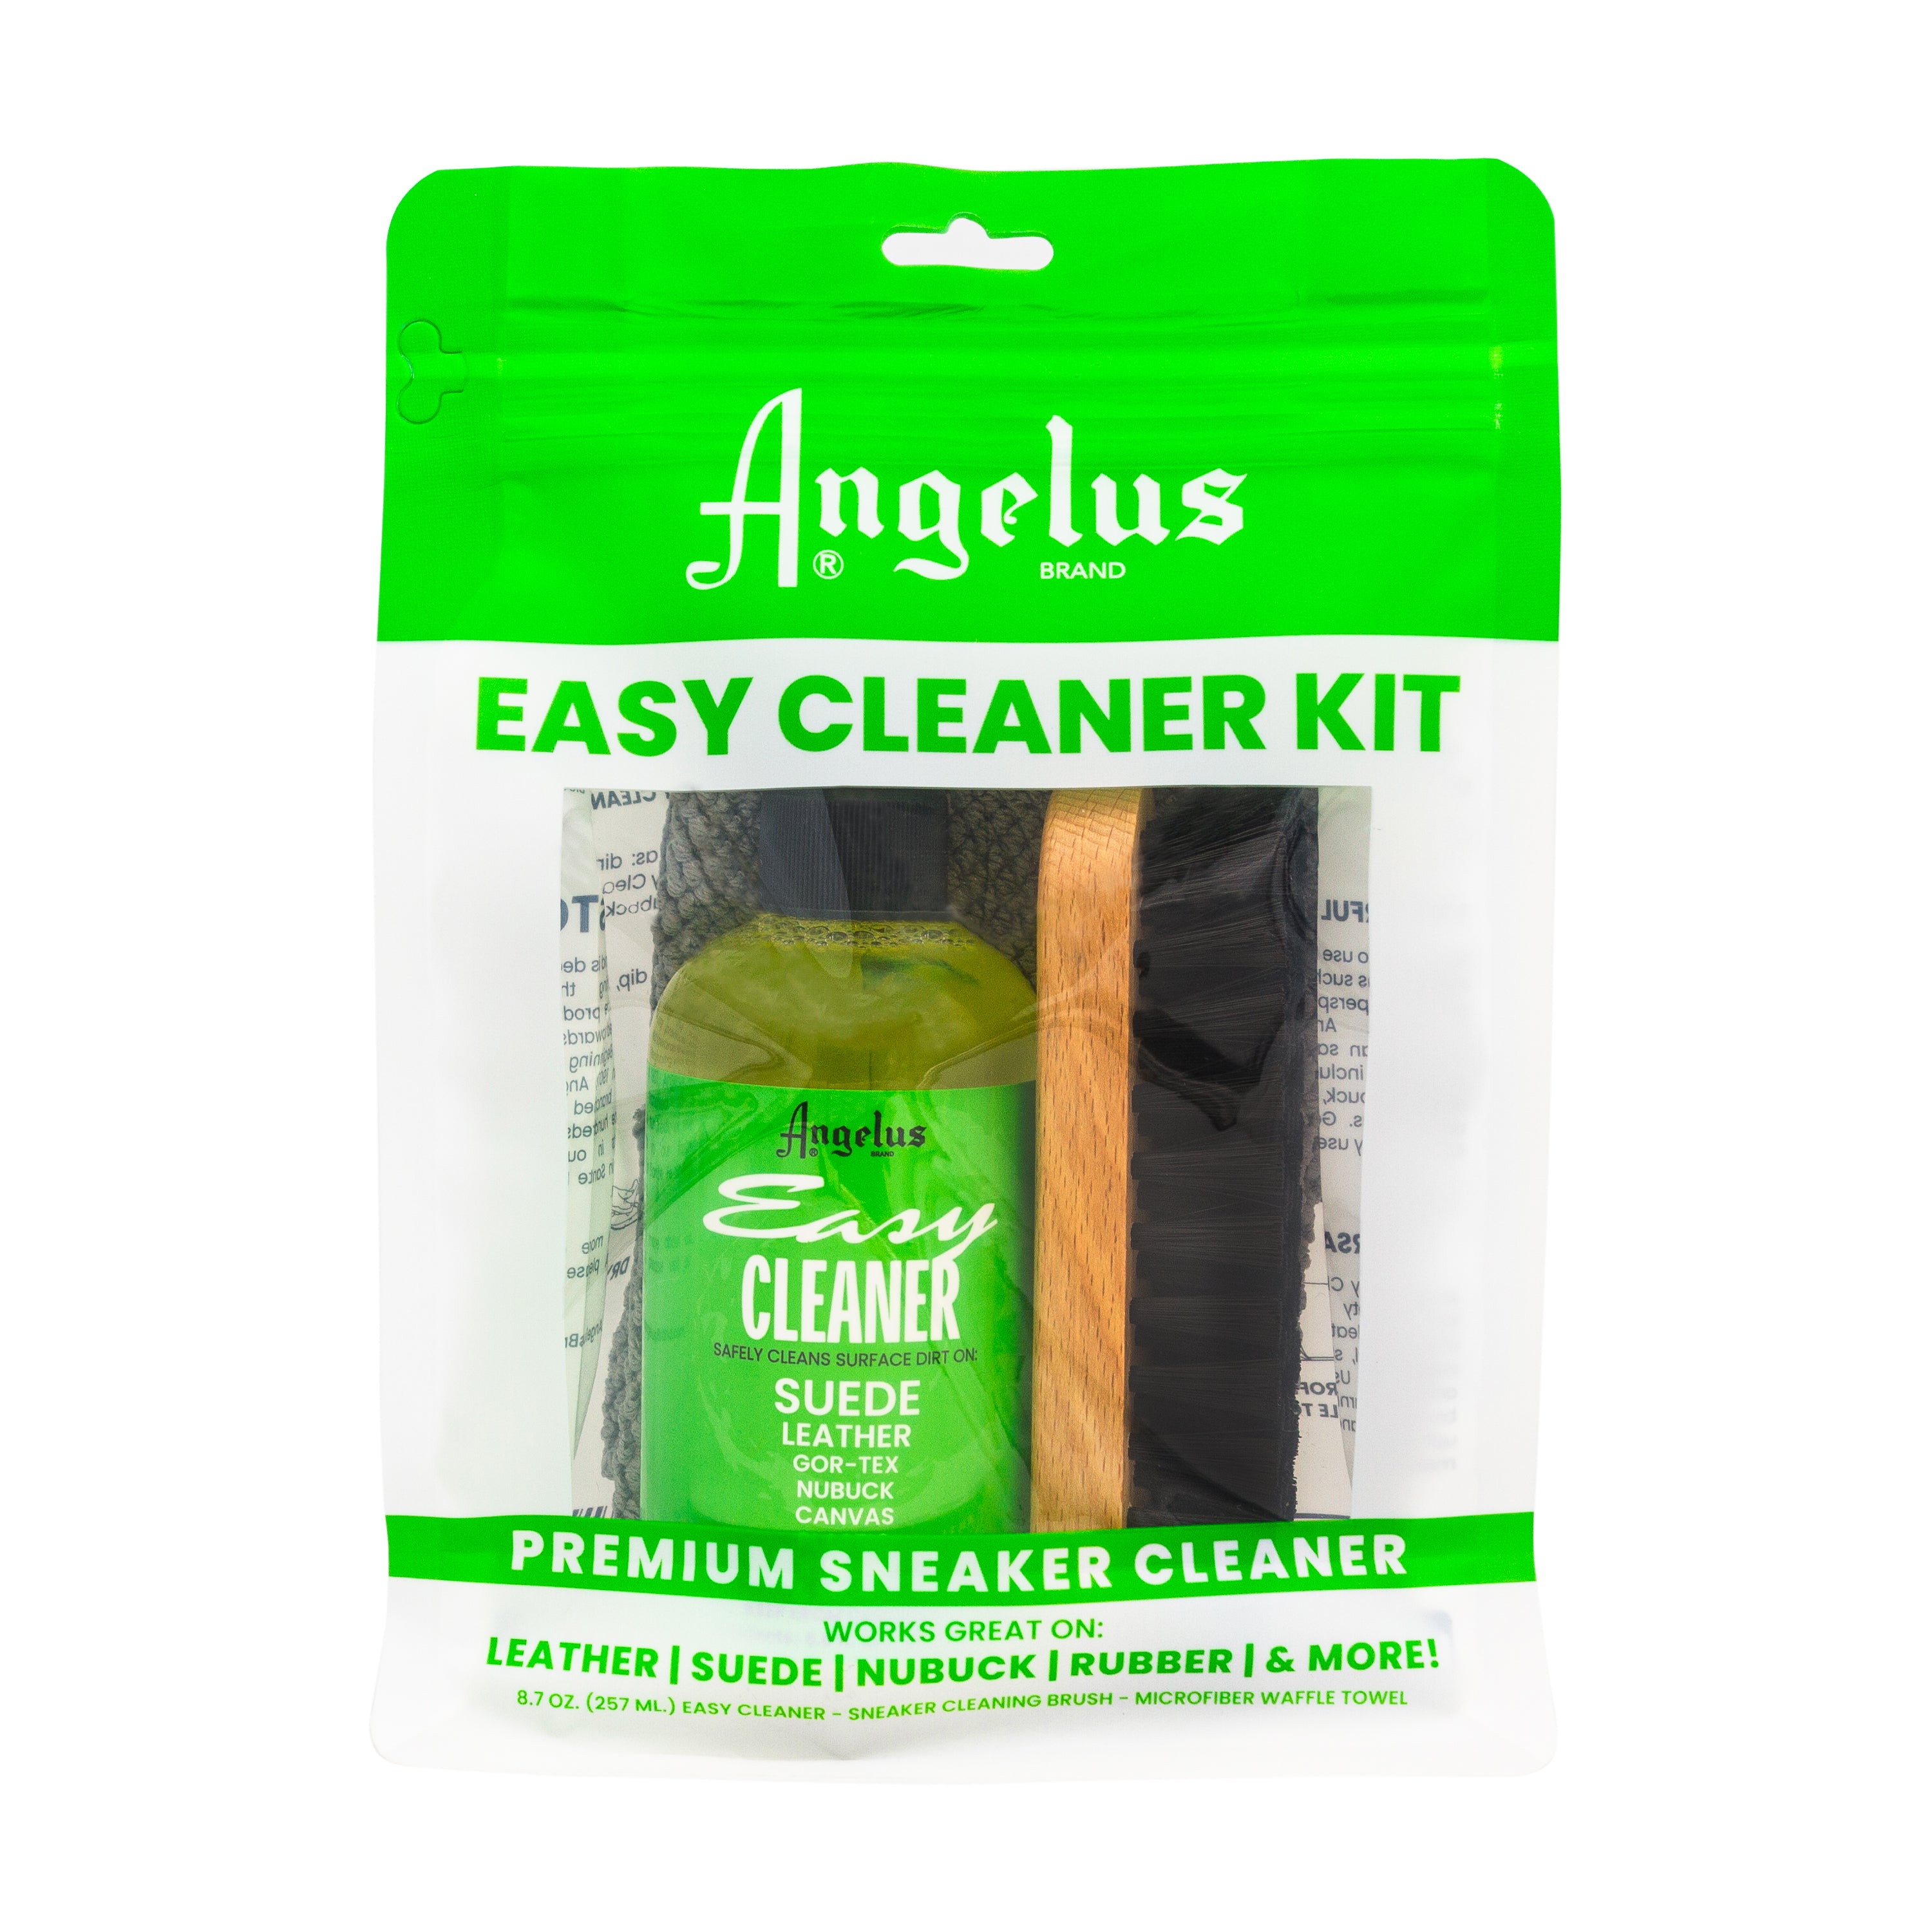 Refreshed Shoe Cleaner & Conditioner | Suede Leather Canvas Nubuck Sneaker Cleaner| Starter + Brush Shoe Cleaning Kit, White